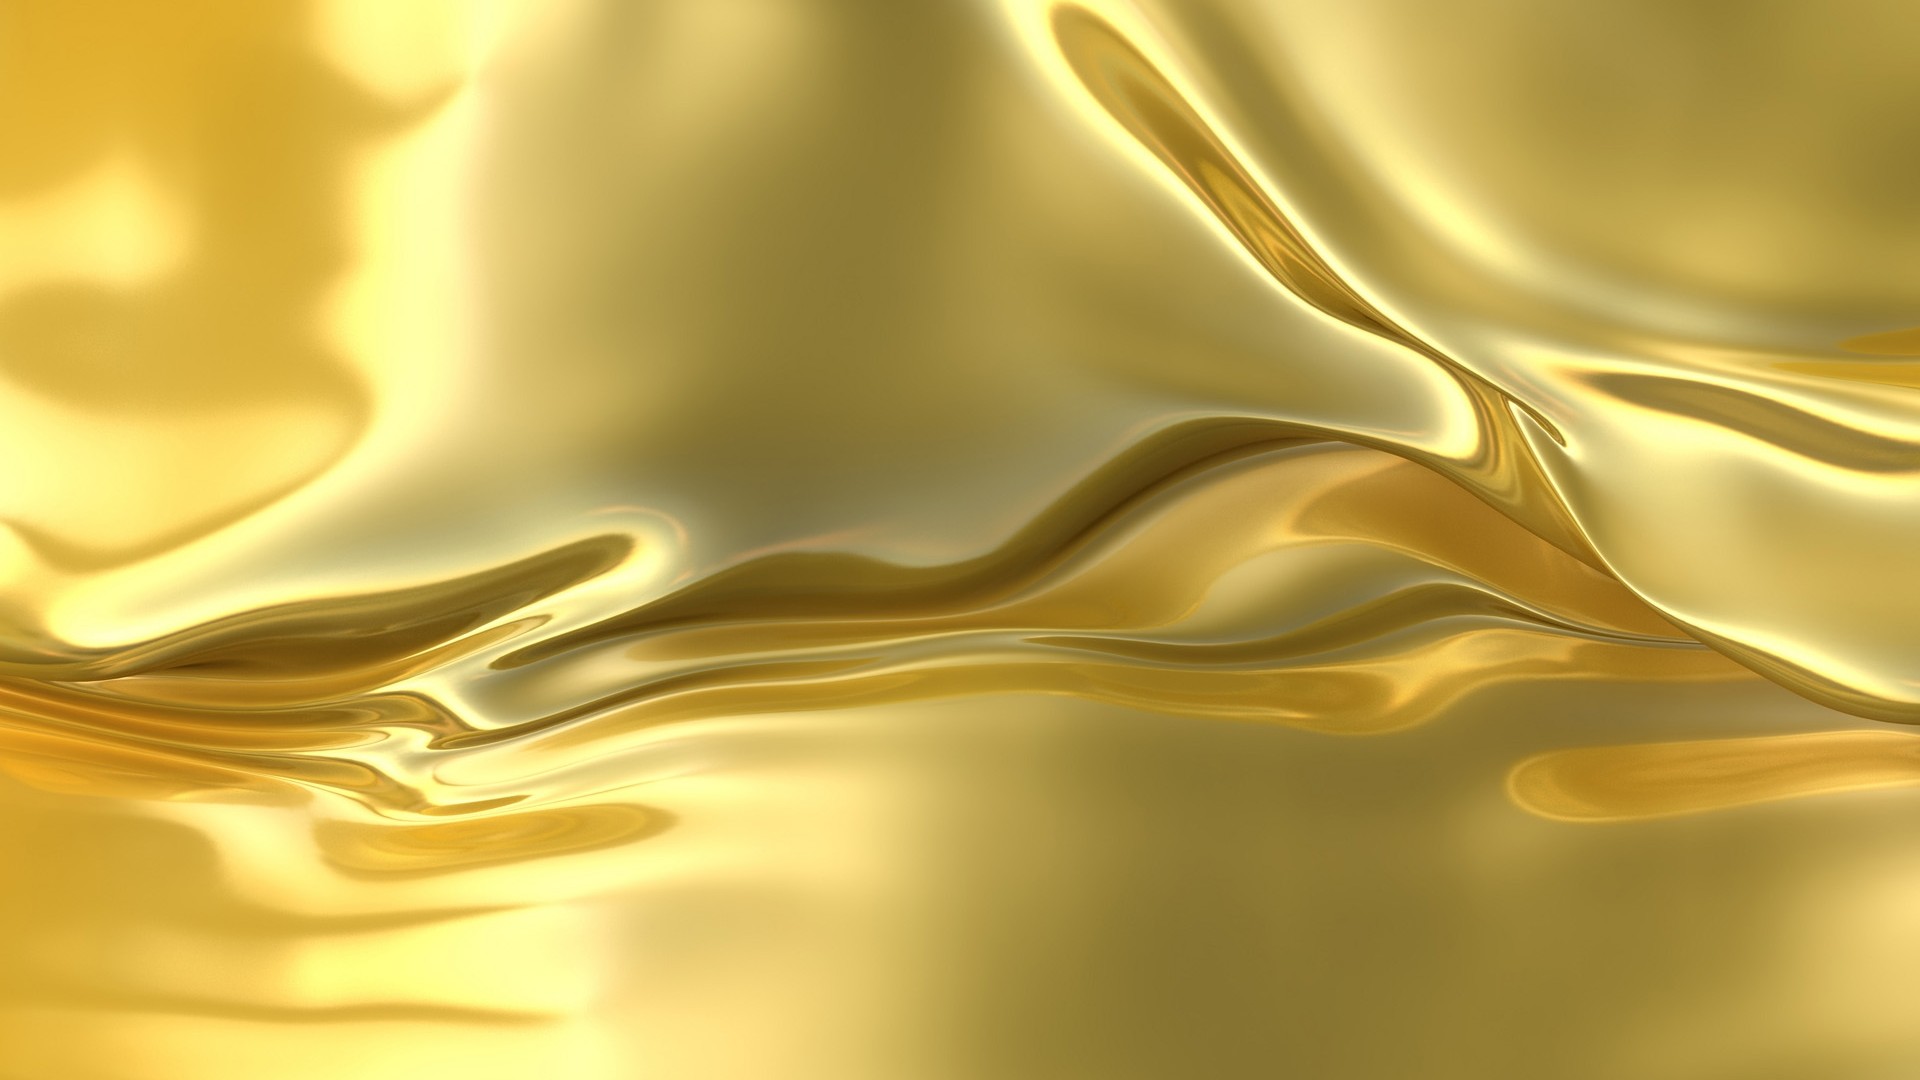 Gold HD Backgrounds 1920x1080